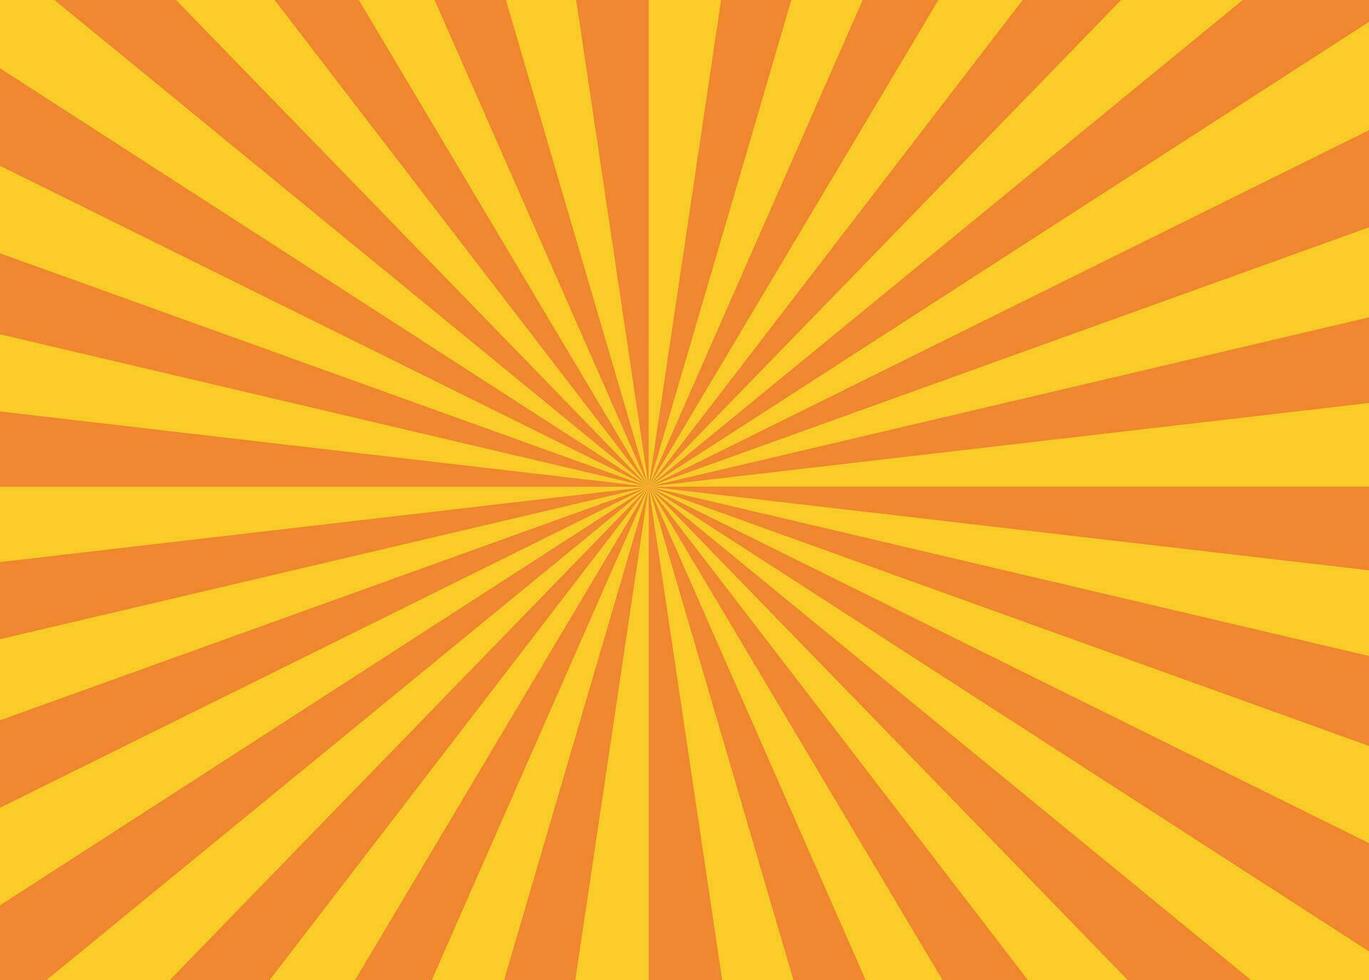 Background sunbrust, with shades of colorful, can be used for banners, posters, anything related to promotions, vector. vector